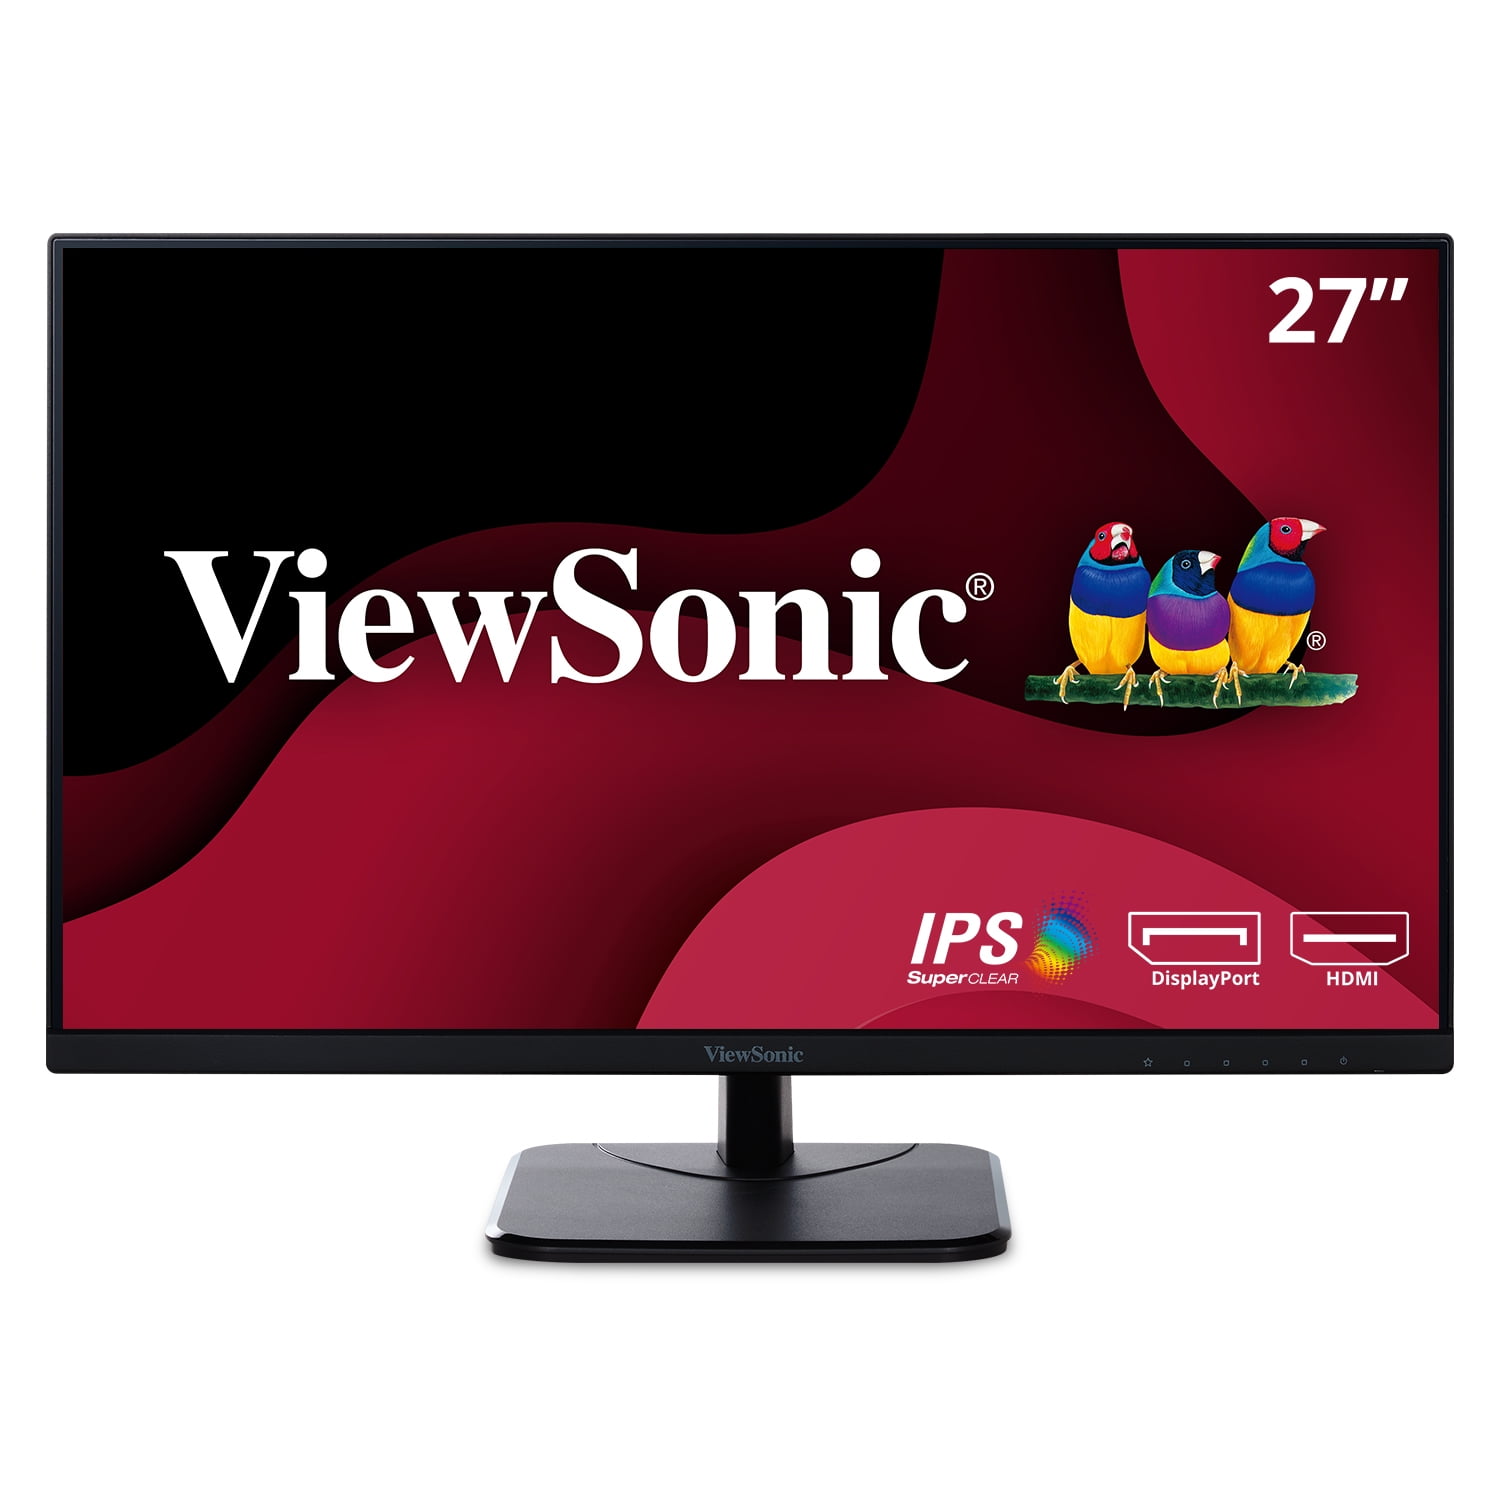 Picture of Viewsonic VA2756-MHD 27 in. Full-HD Super Clear IPS LED Monitor